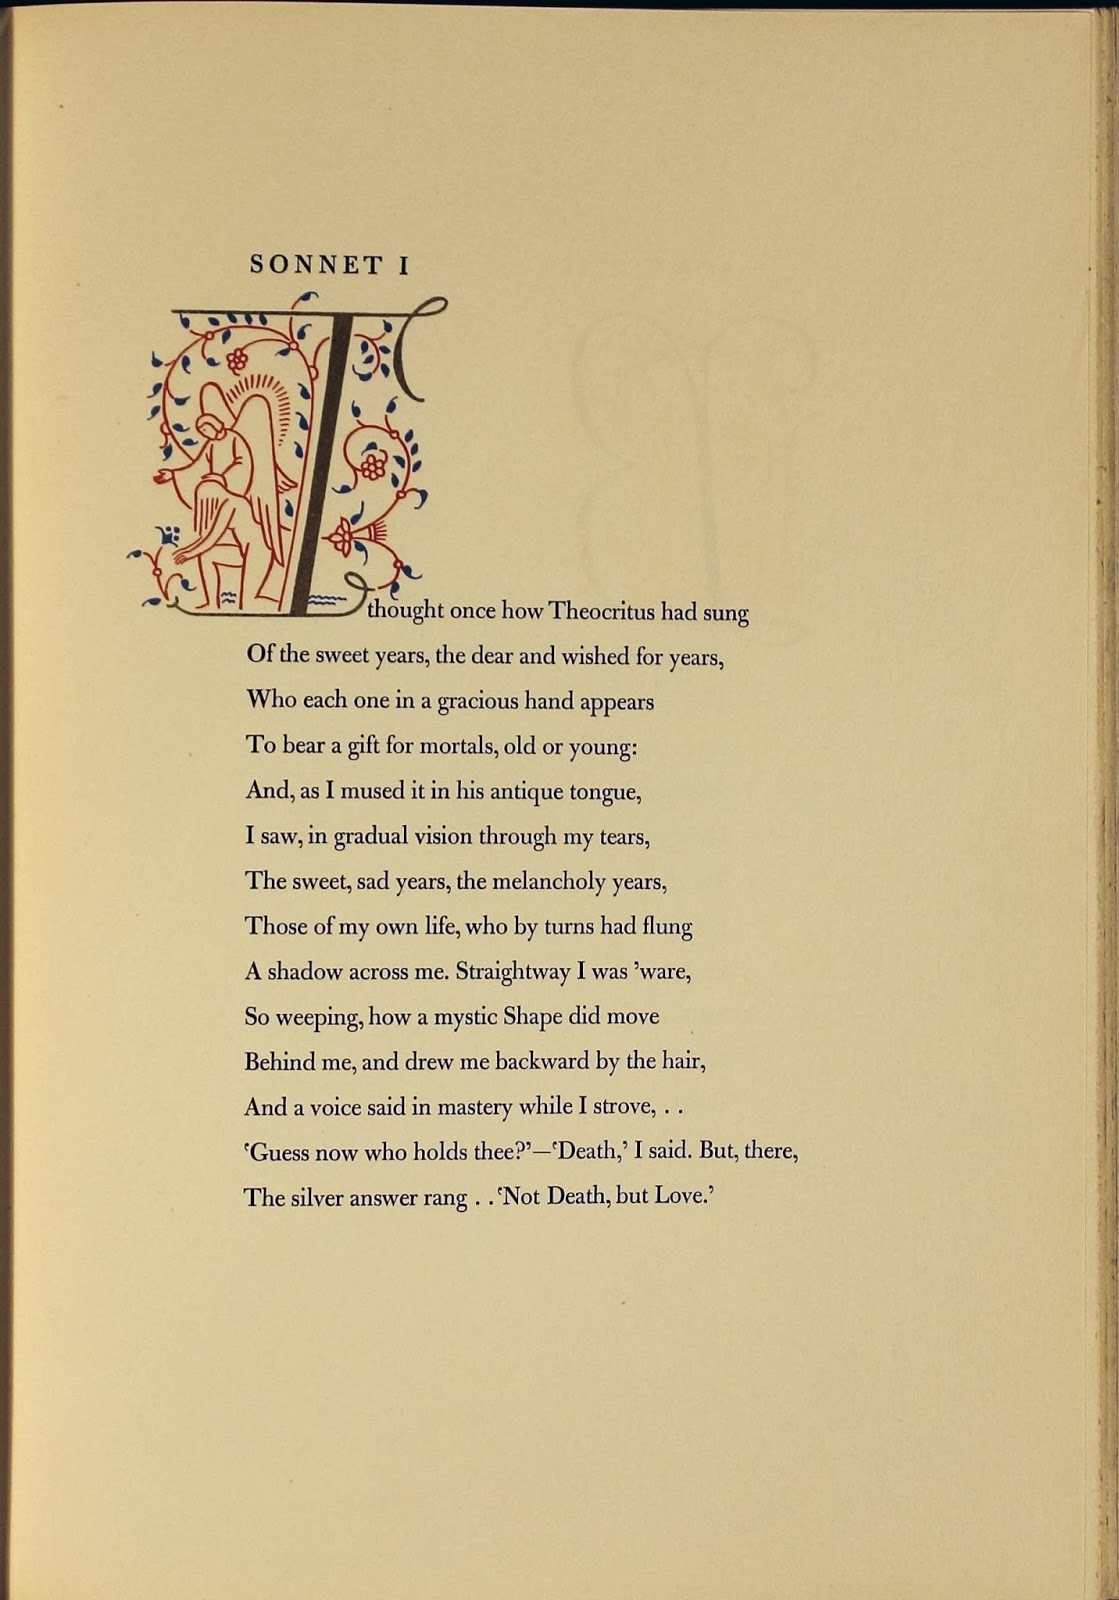 Sonnets from the Portuguese by Elizabeth Barrett Browning